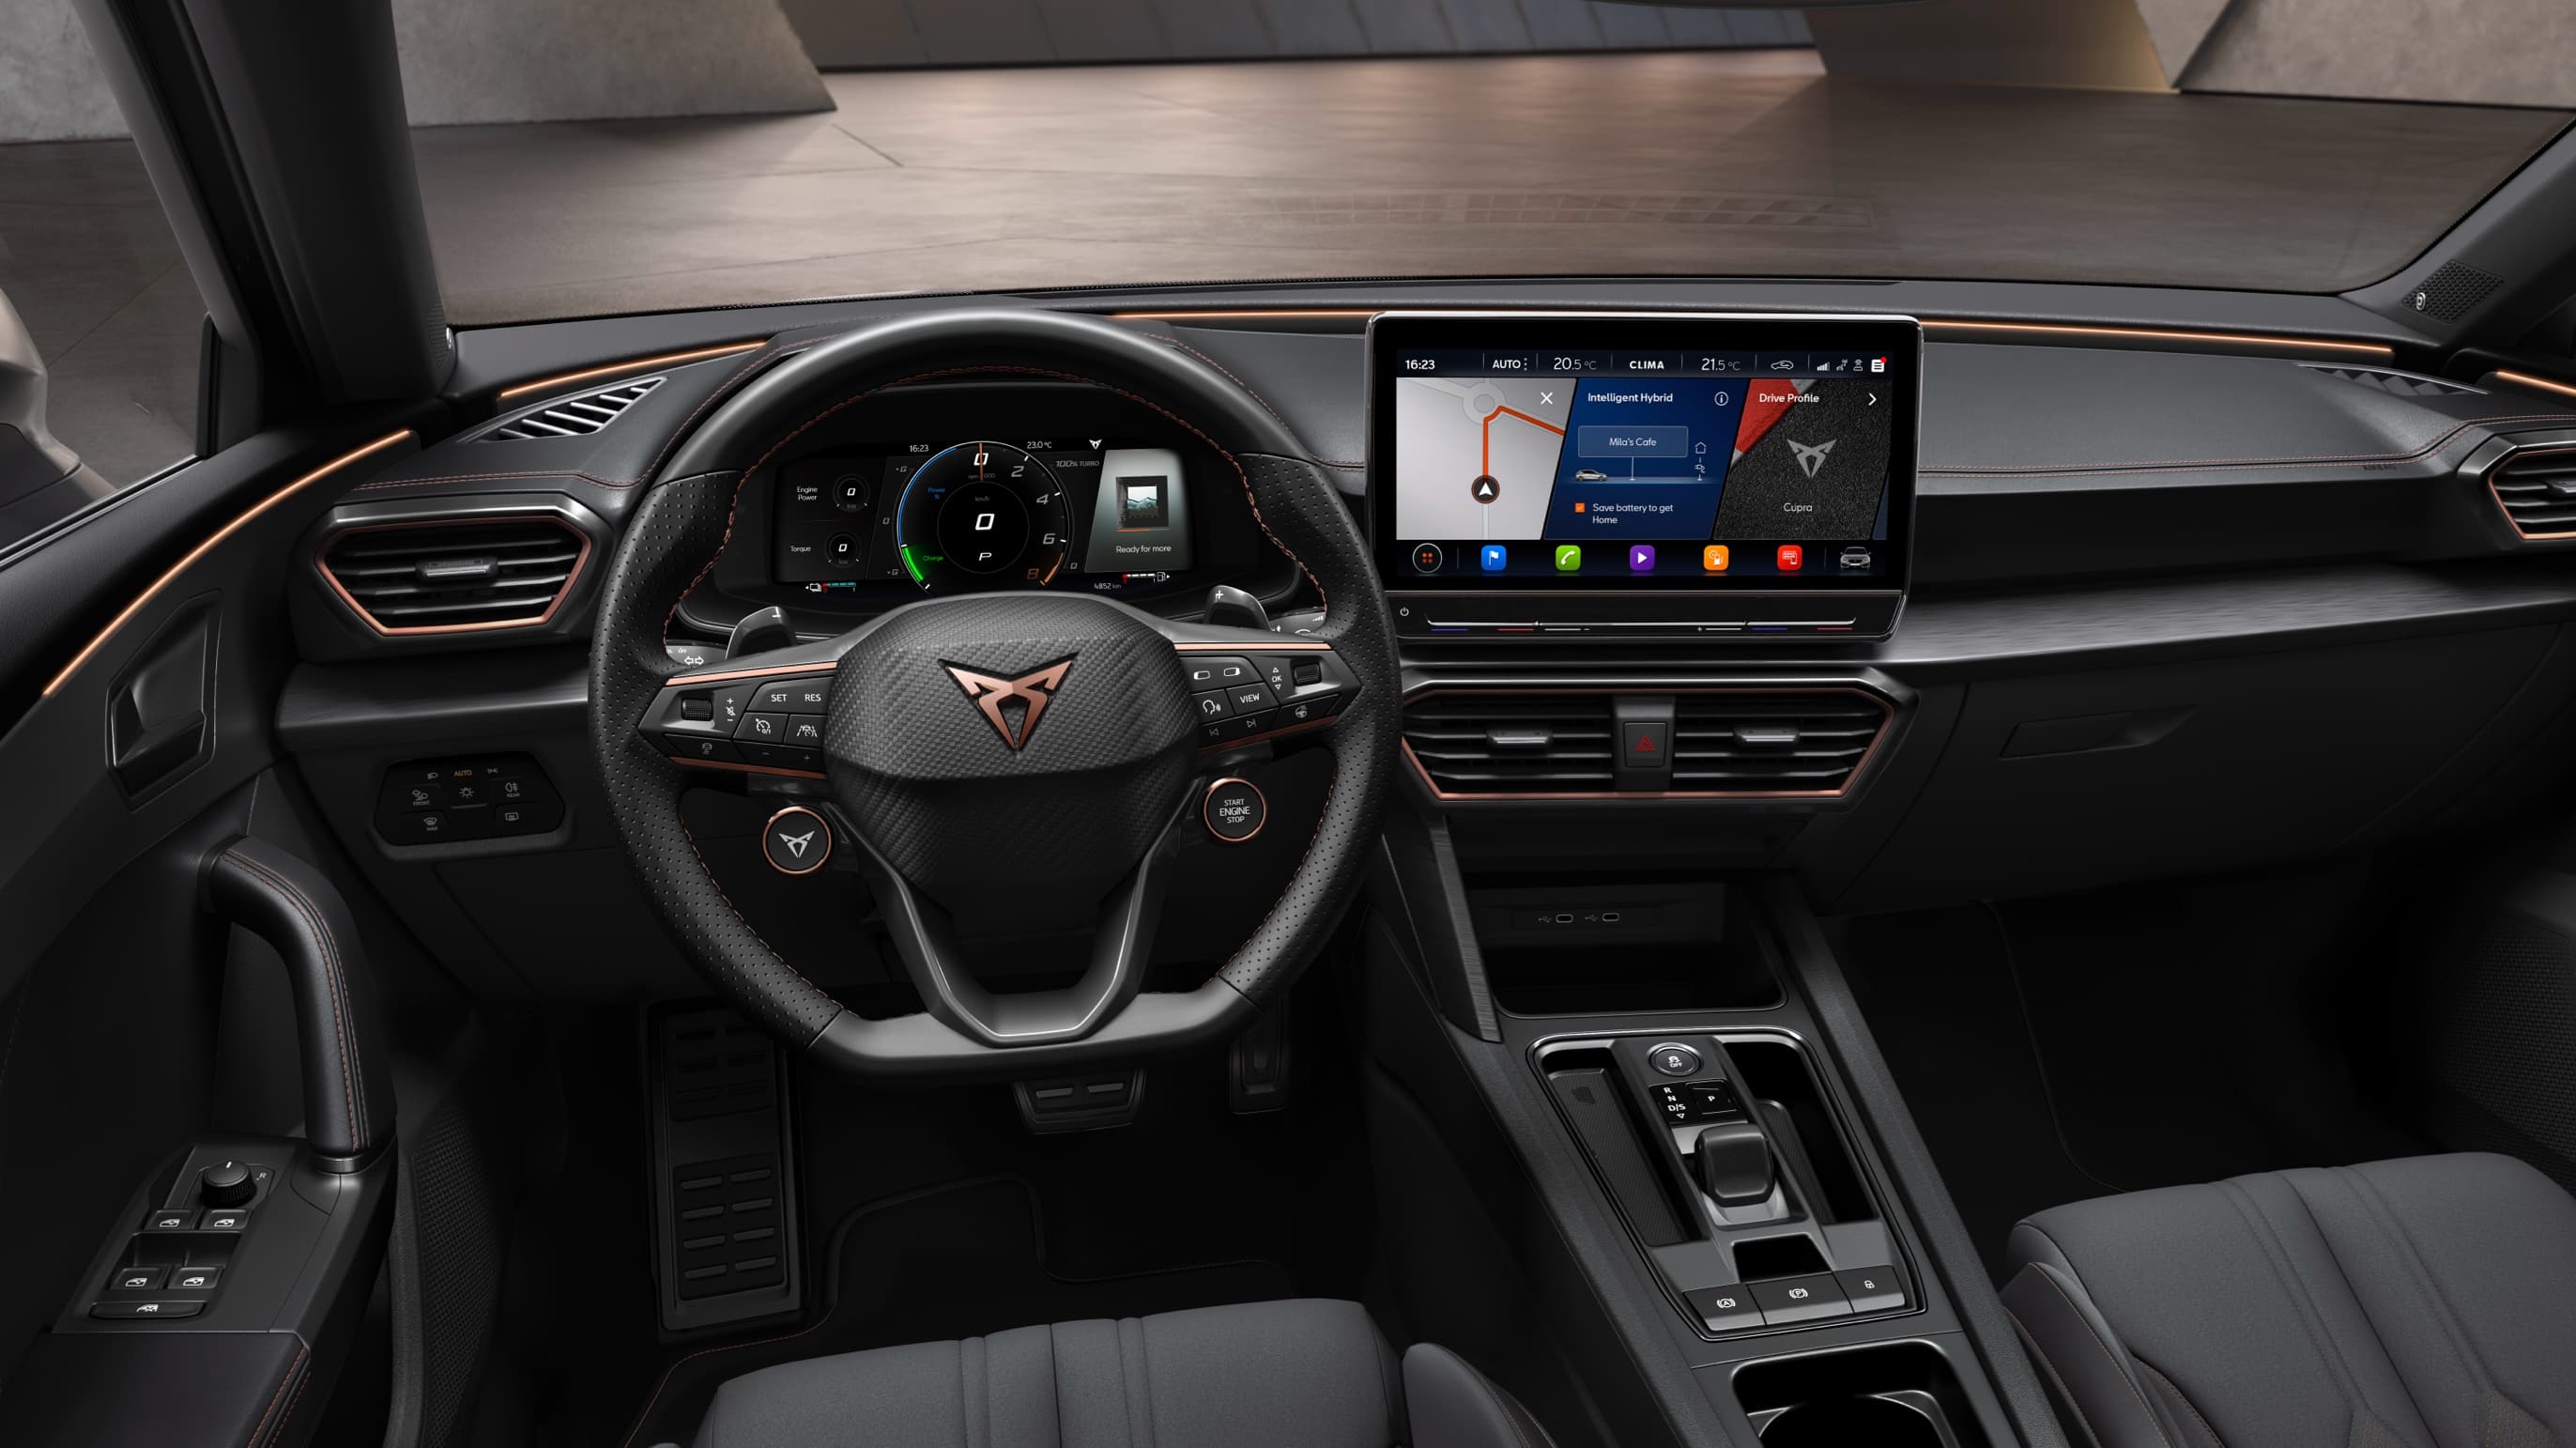 https://www.cupraofficial.fr/content/dam/public/cupra-website/myco/2425/cars/cupra-range/leon-sportstourer/overview/gallery-features-interior-design/x-large/new-cupra-leon-sportstourer-ehybrid-family-sports-car-interior-view-leather-steering-wheel-with-driving-profile-mode.jpg